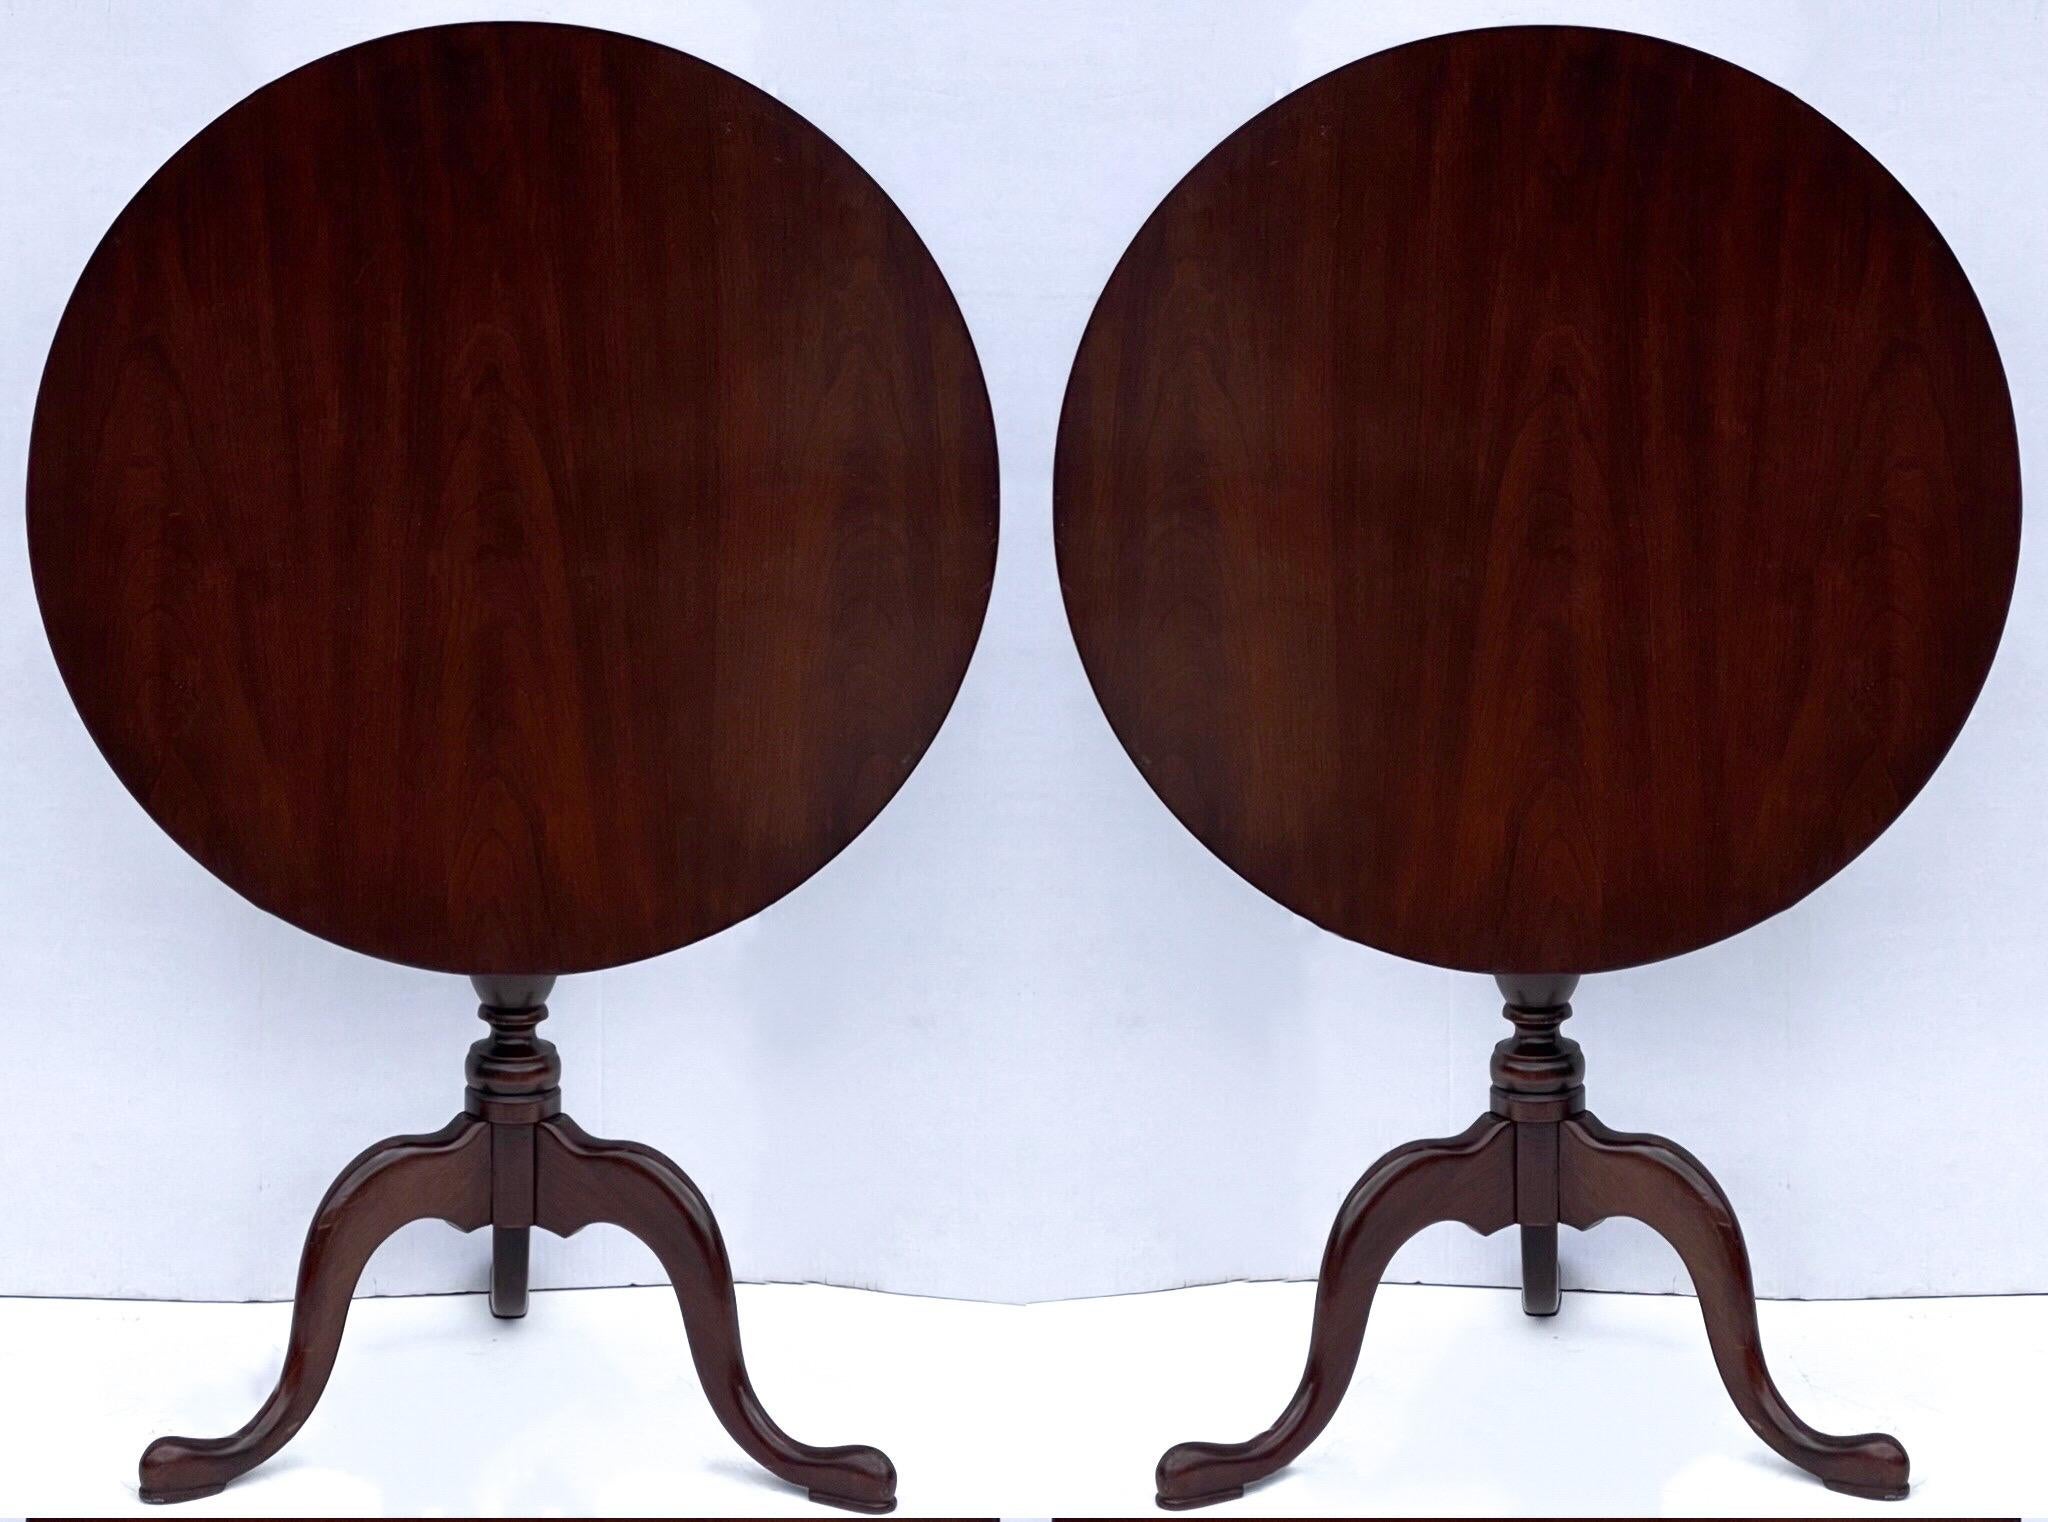 American Classical Mahogany Tripod Tilt Top Side Tables by Baker Furniture for Hitchcock Pair